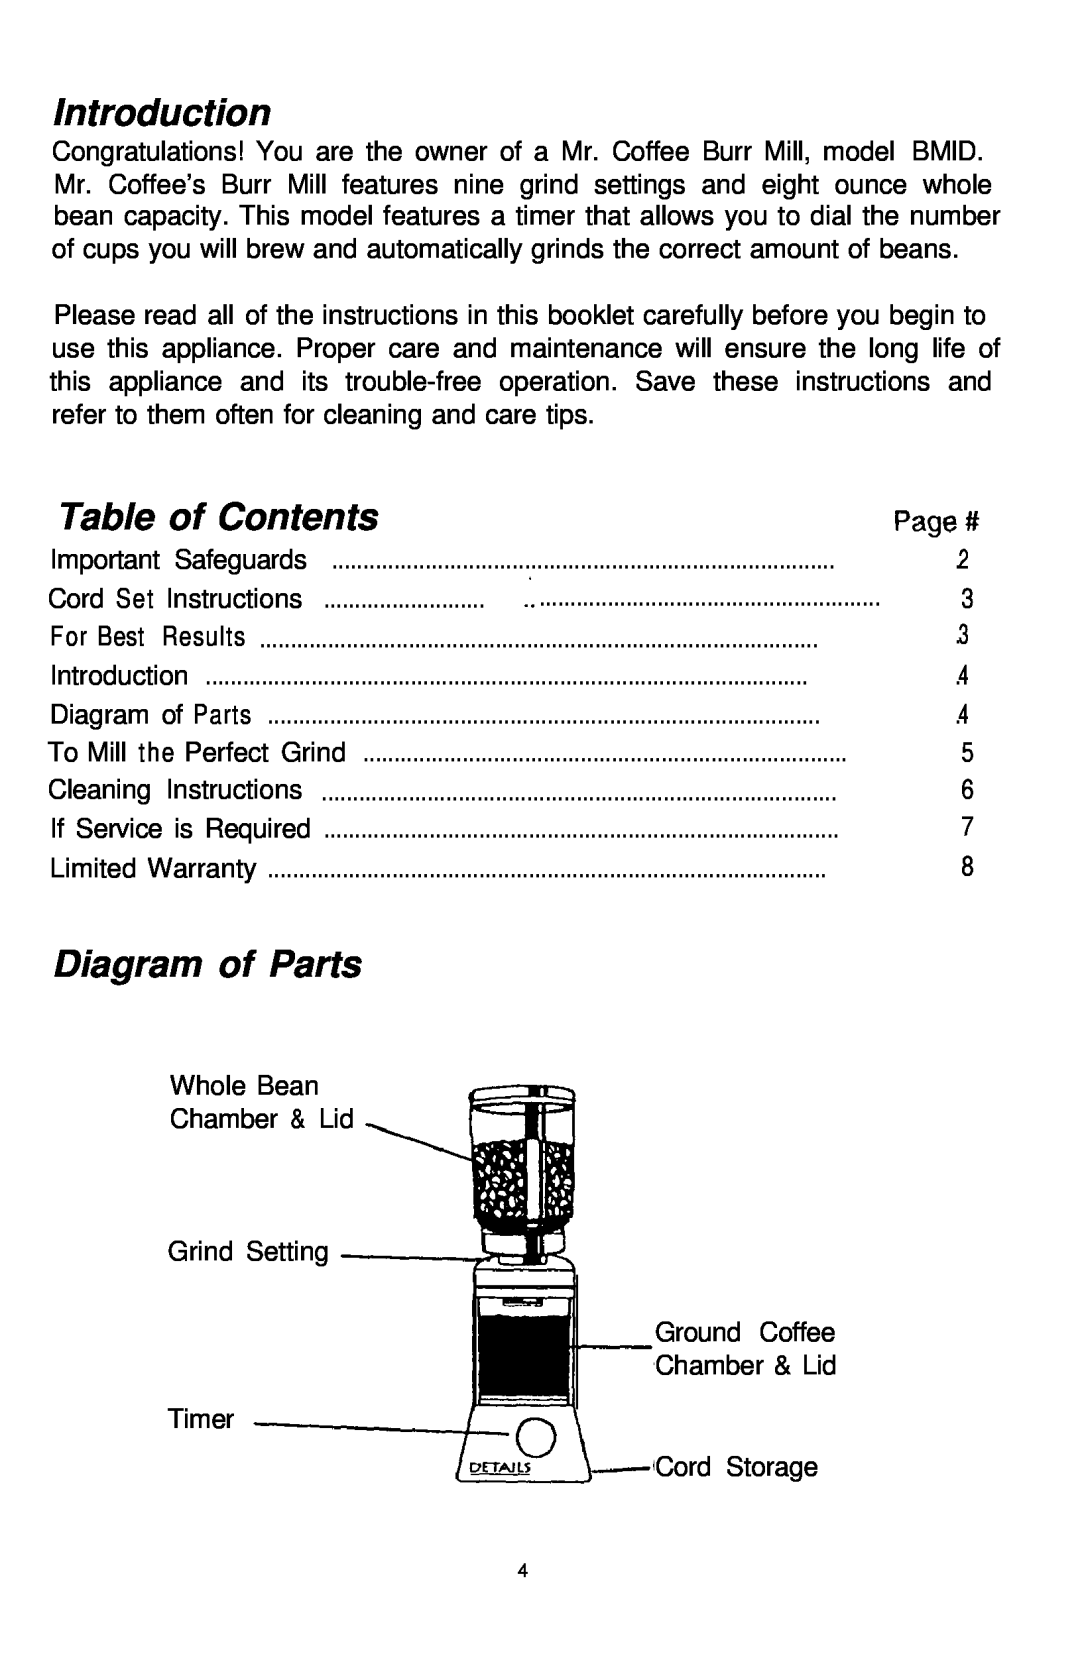 Mr. Coffee BMLD manual Introduction, Table of Contents, Diagram of Parts 